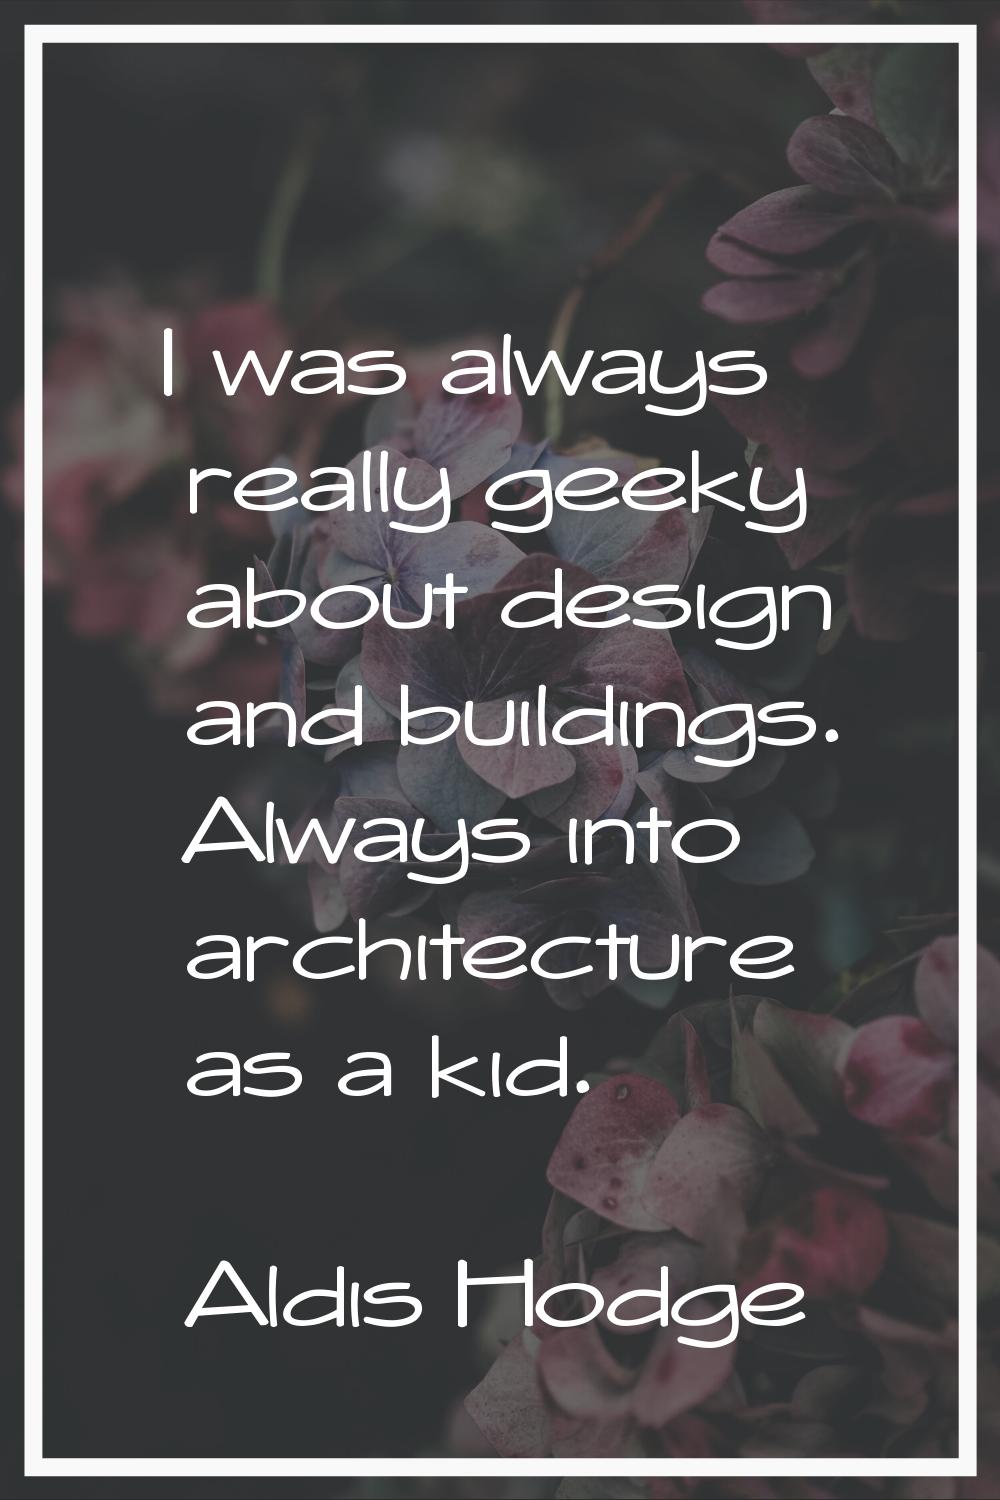 I was always really geeky about design and buildings. Always into architecture as a kid.